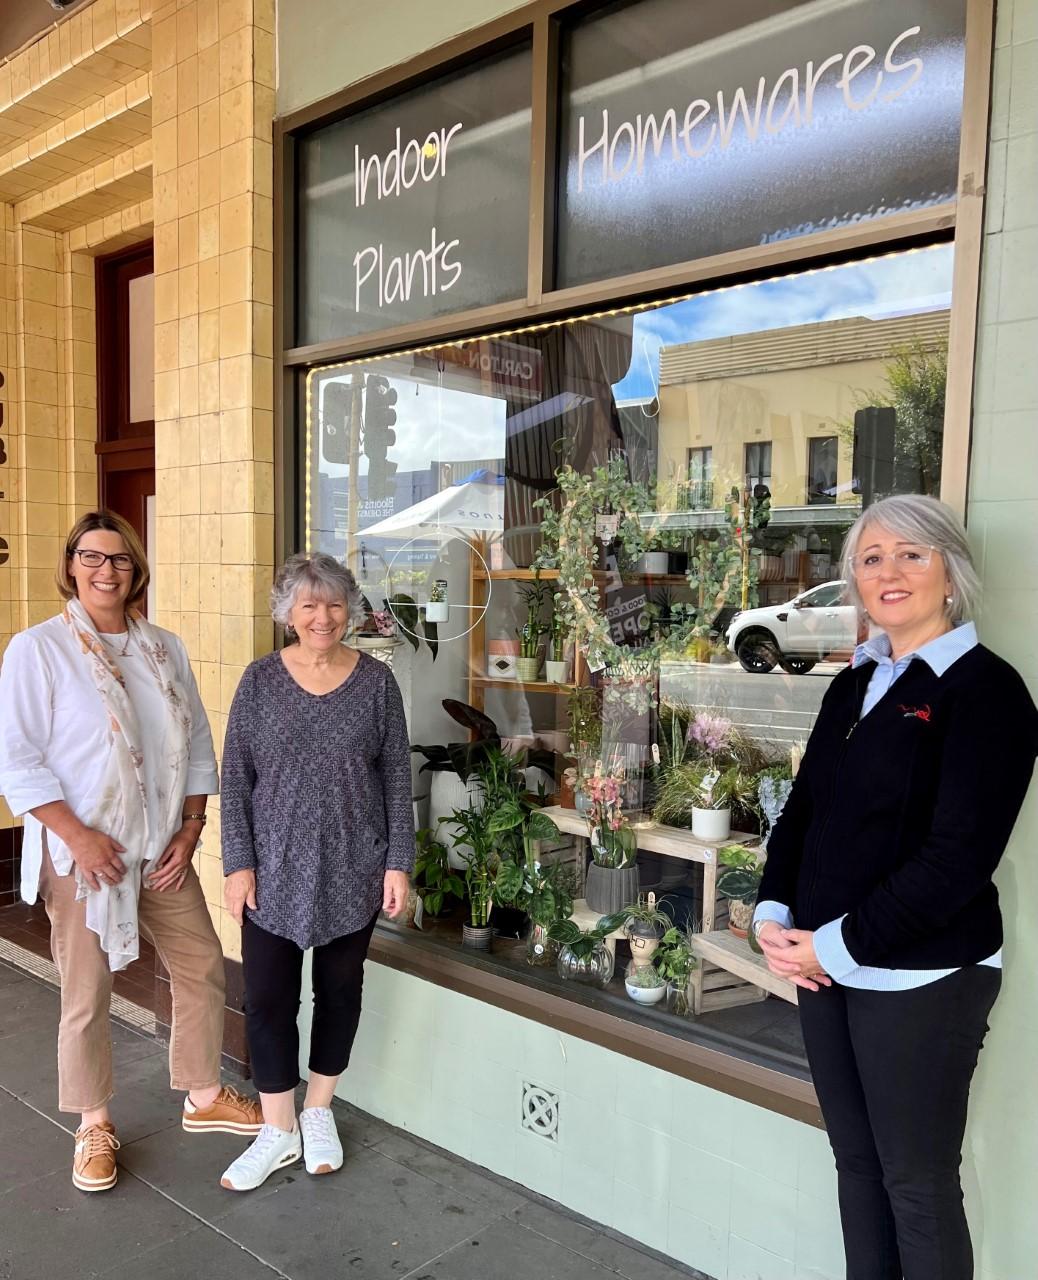 We’re Knot Crazy owner Betti Los, Ararat Rural City Council Mayor Jo Armstrong, and Maria Whitford (GABN) in support of the ‘Putting Local Business First’ campaign 